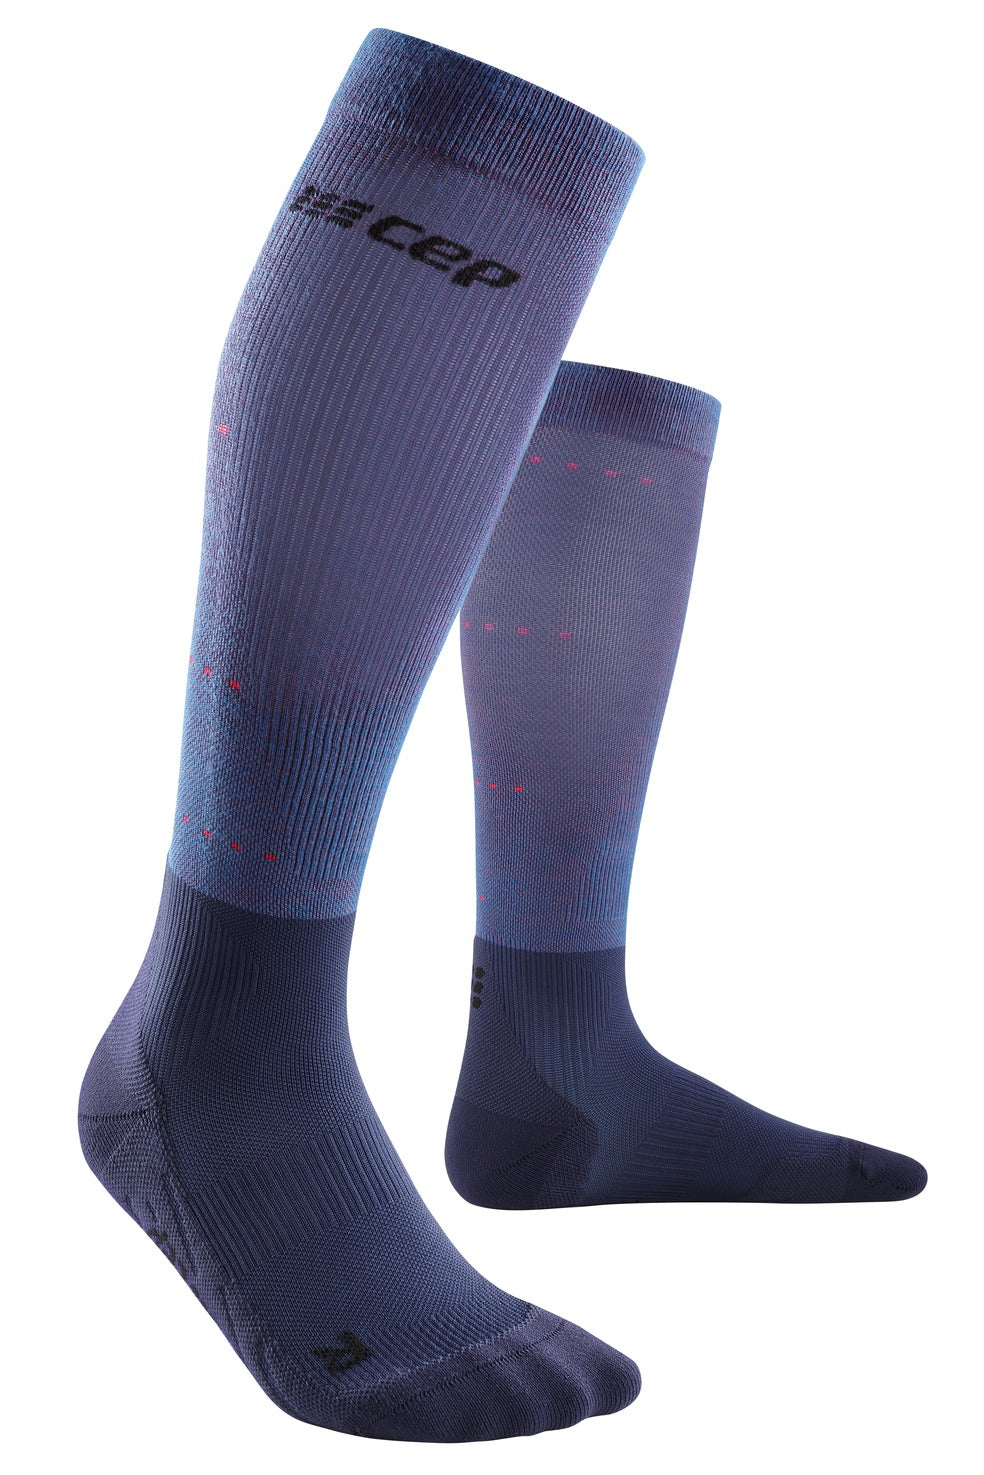 CEP Infrared Recovery Knee-high Compression Socks